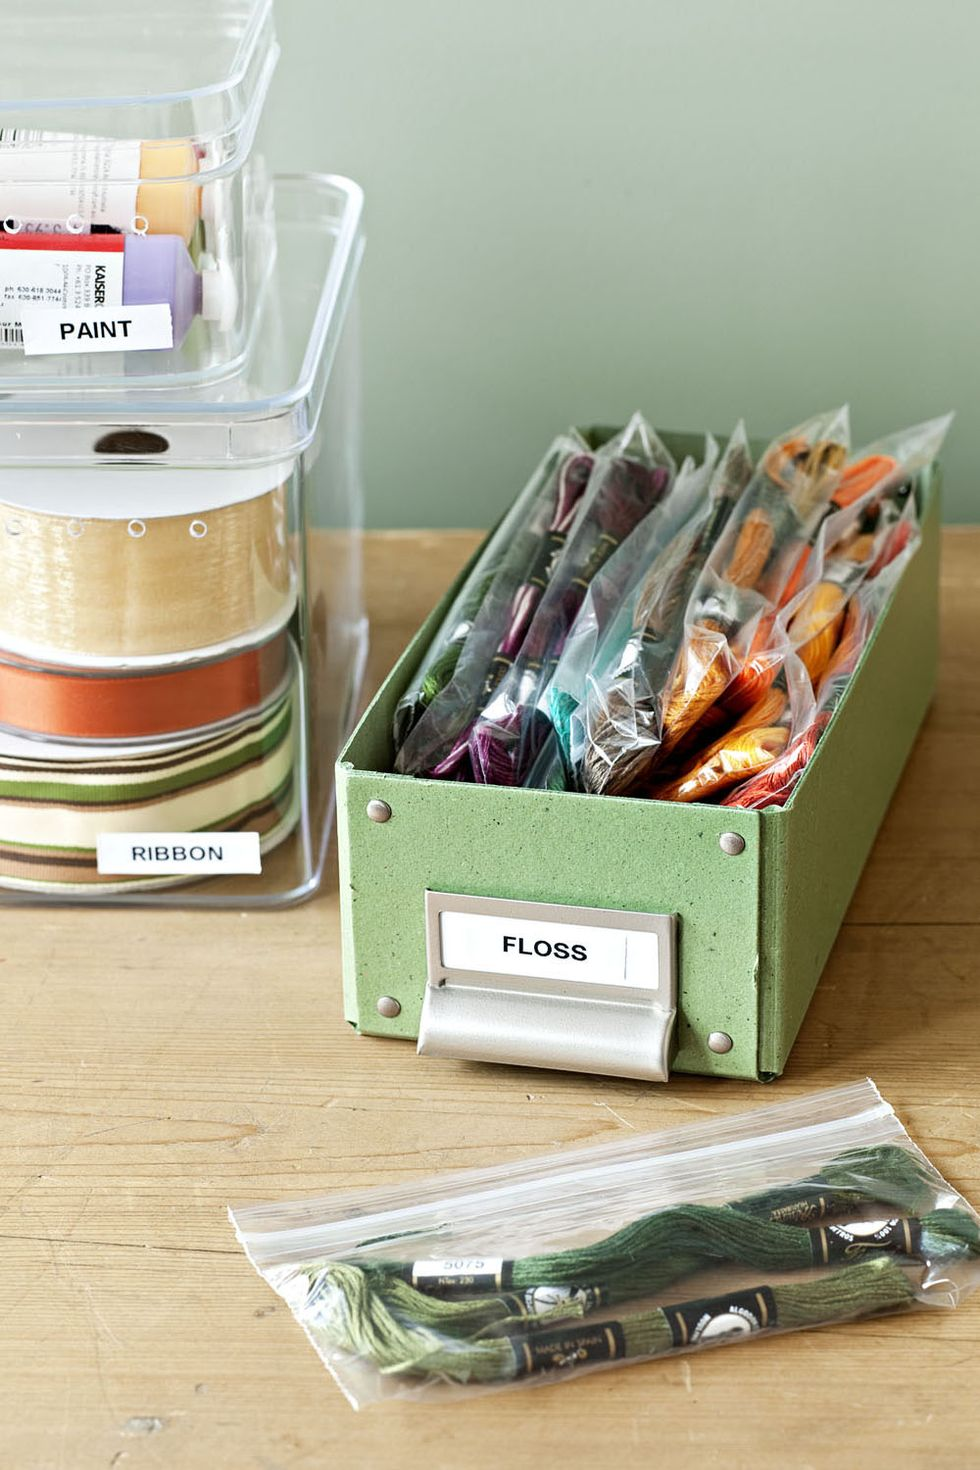 how to organize craft room